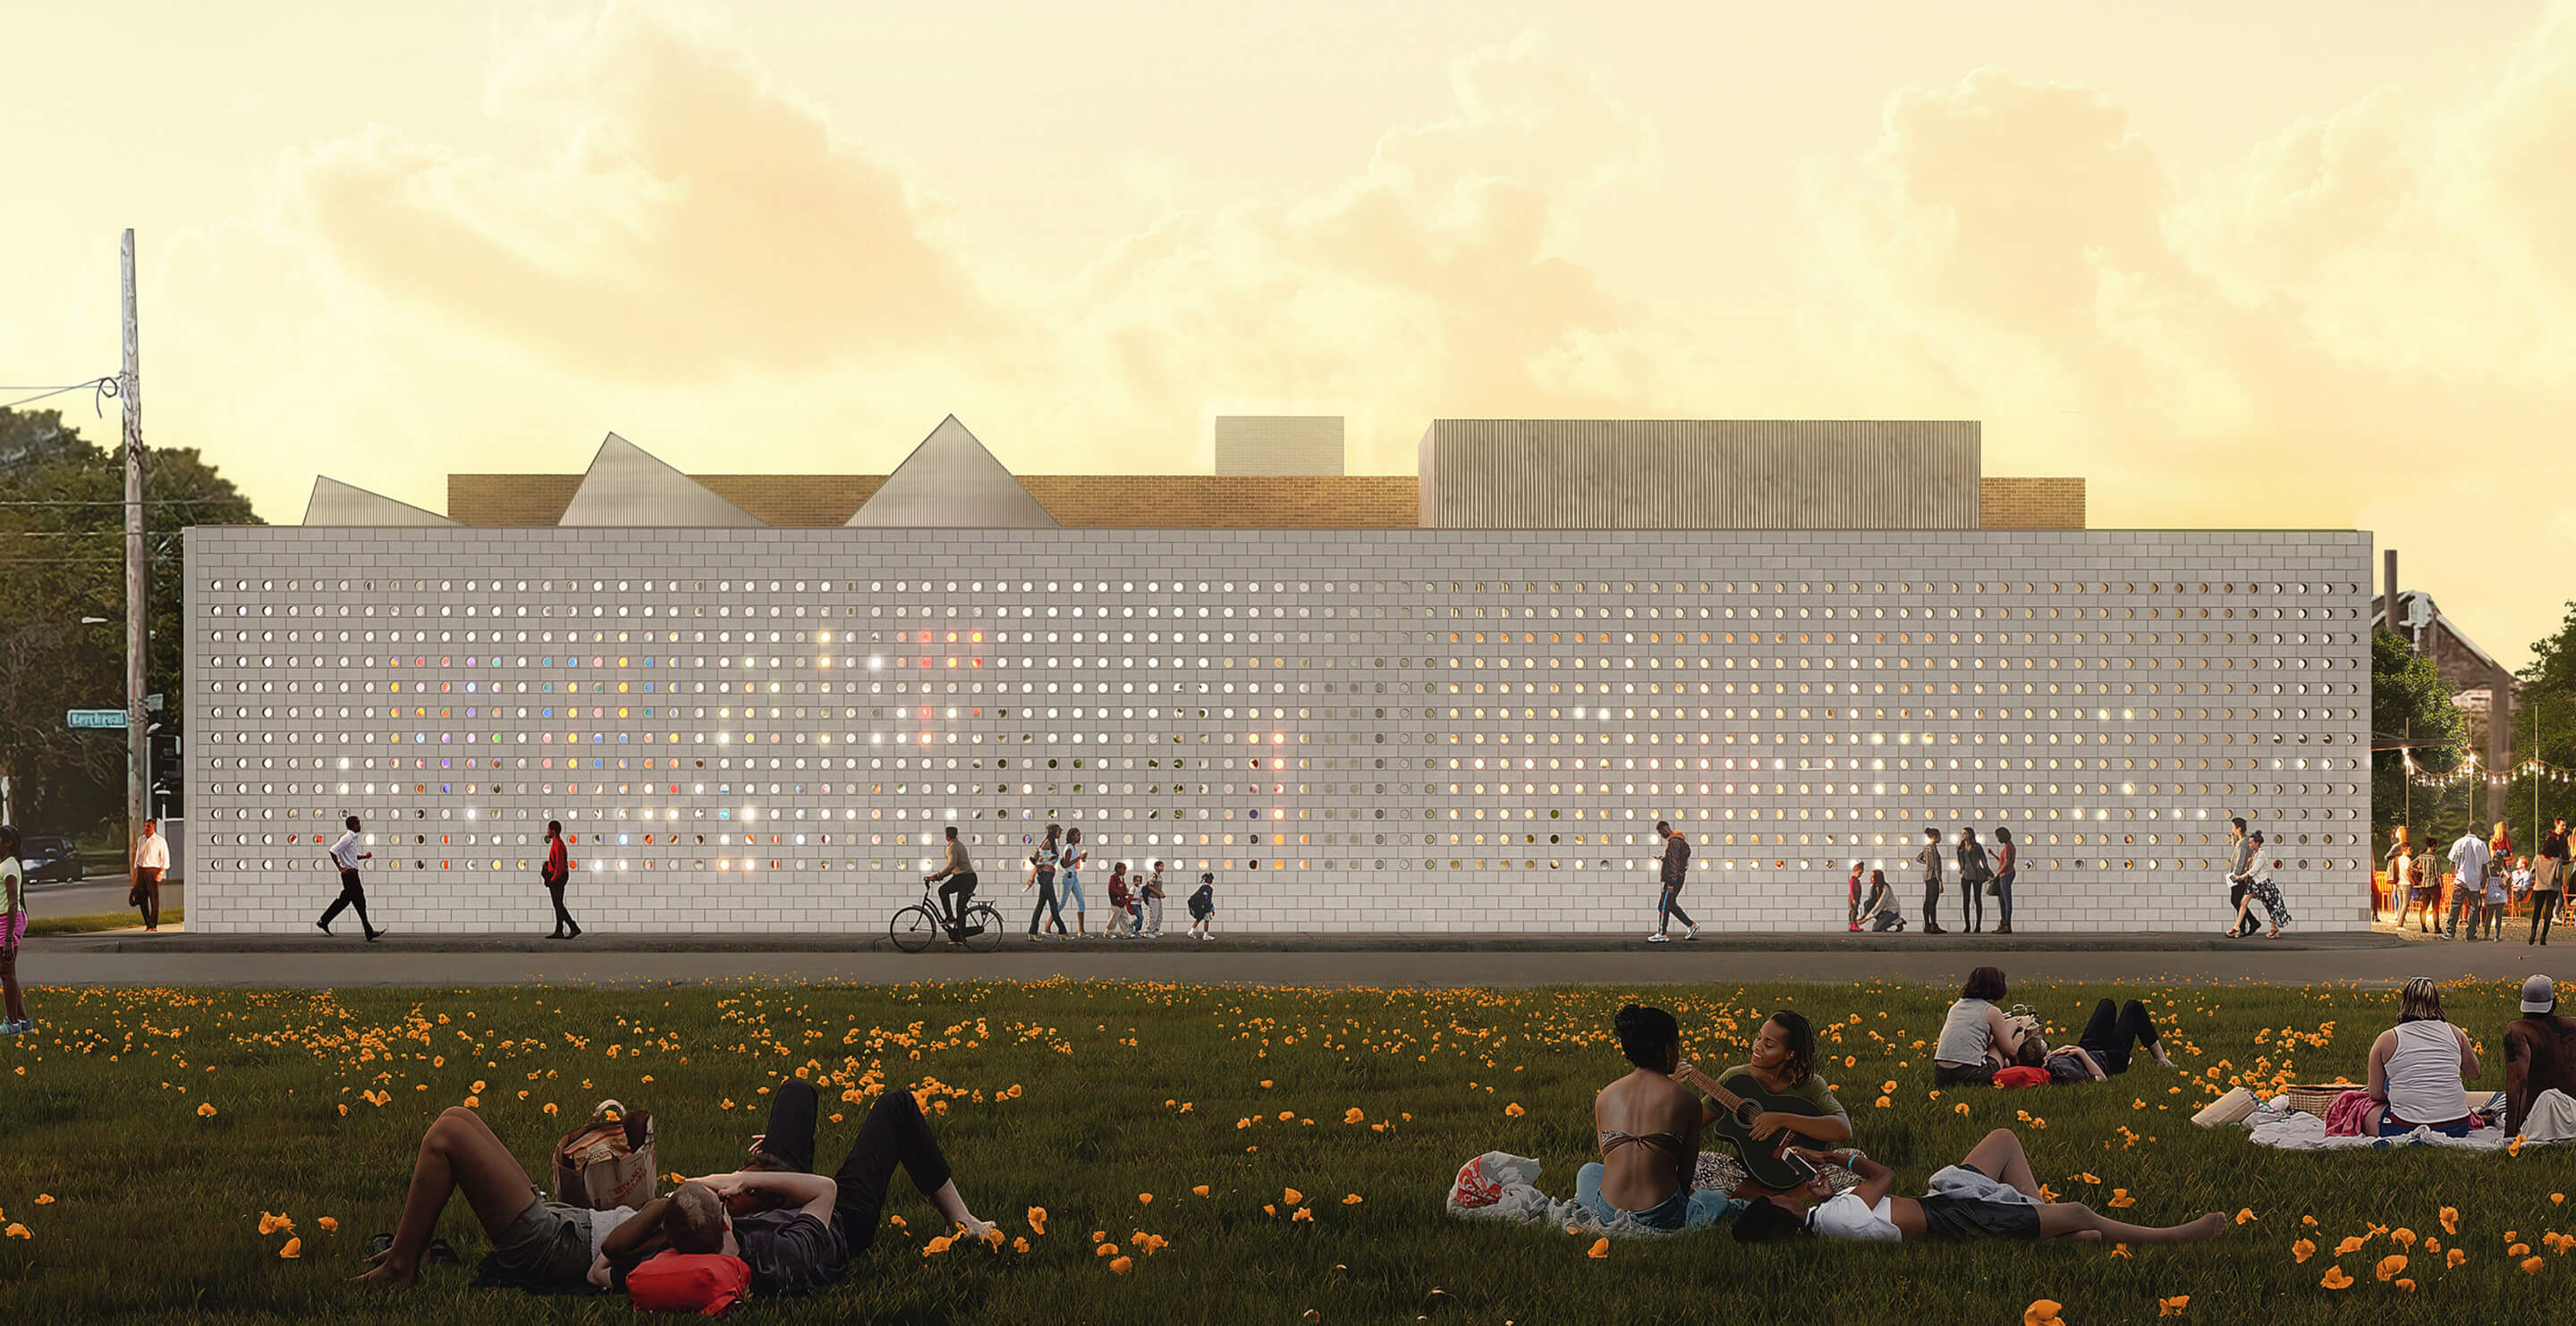 rendering of a building facade with many holes glowing at night